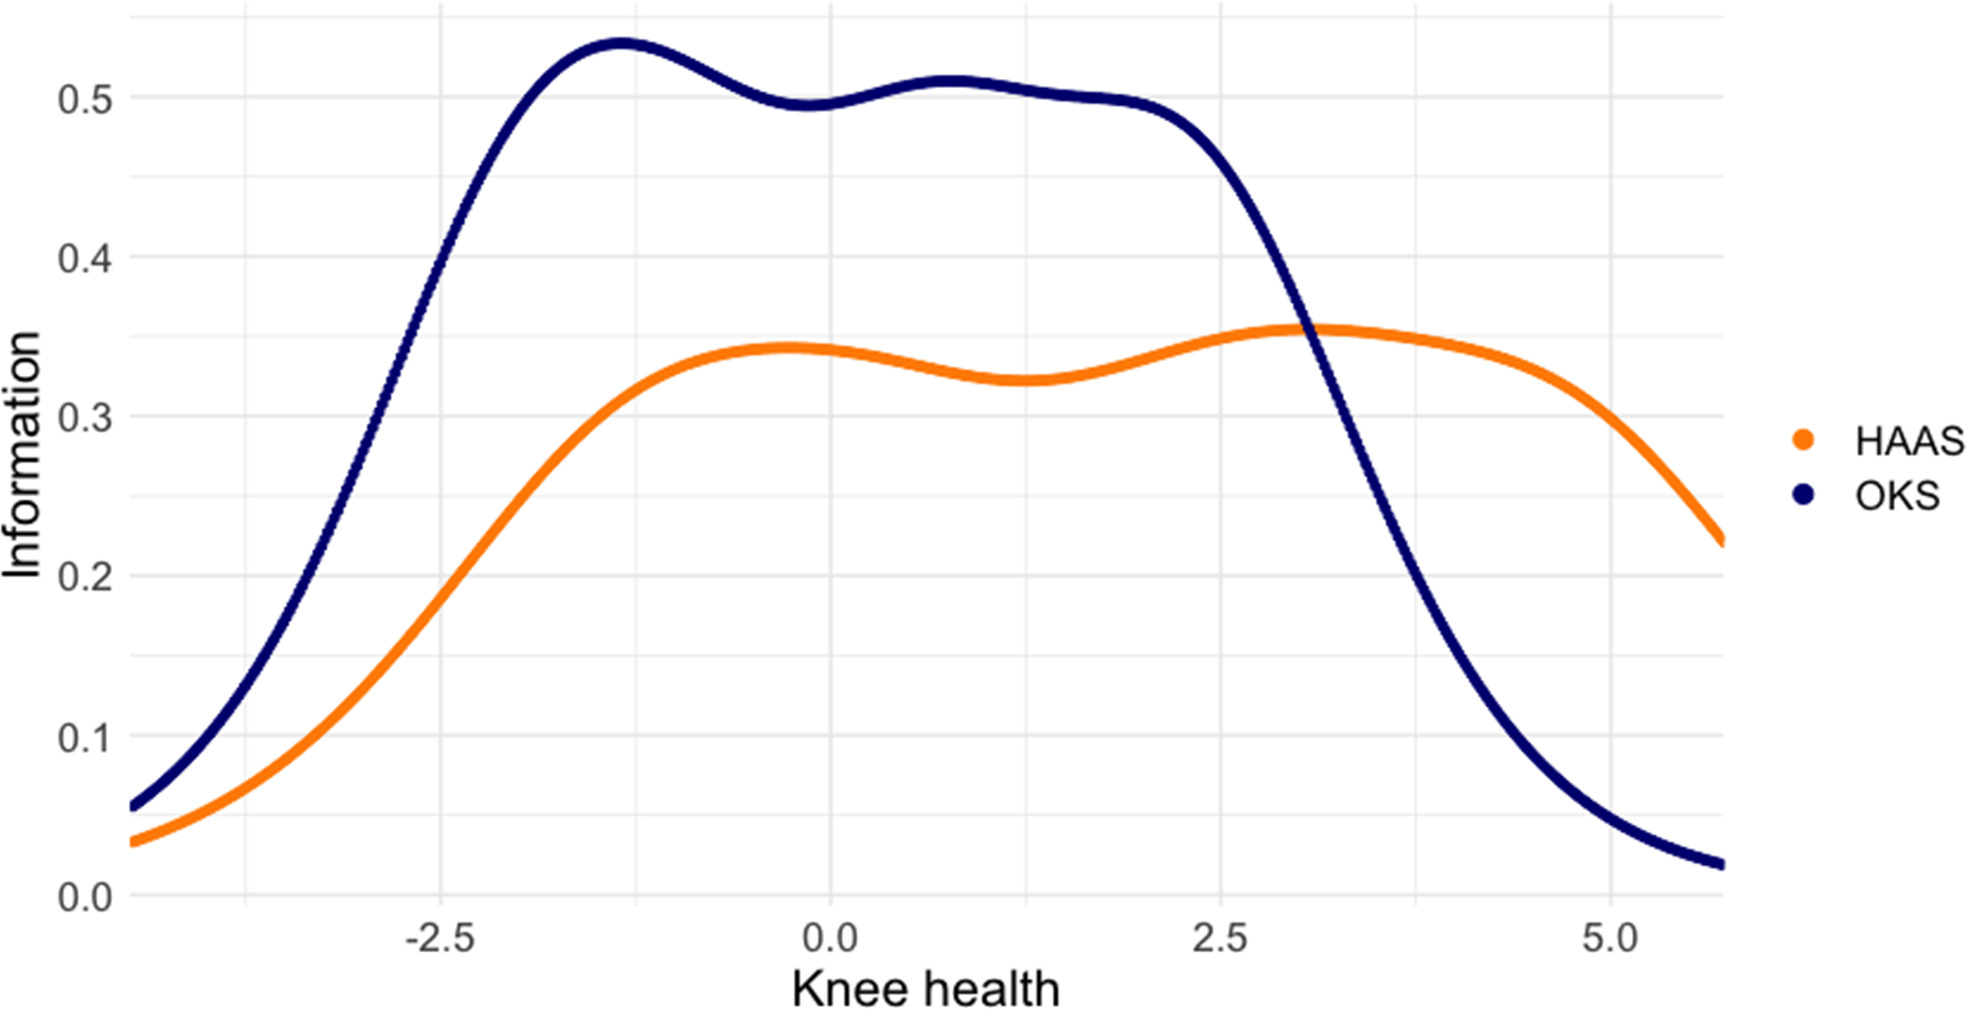 Fig. 3 
            Information provided by the Oxford Knee Score (OKS) stair climbing item and the High Activity Arthroplasty Score (HAAS) stair climbing item across knee health levels. At knee health levels over three logits, the HAAS item provides more precise measurement than the OKS item.
          